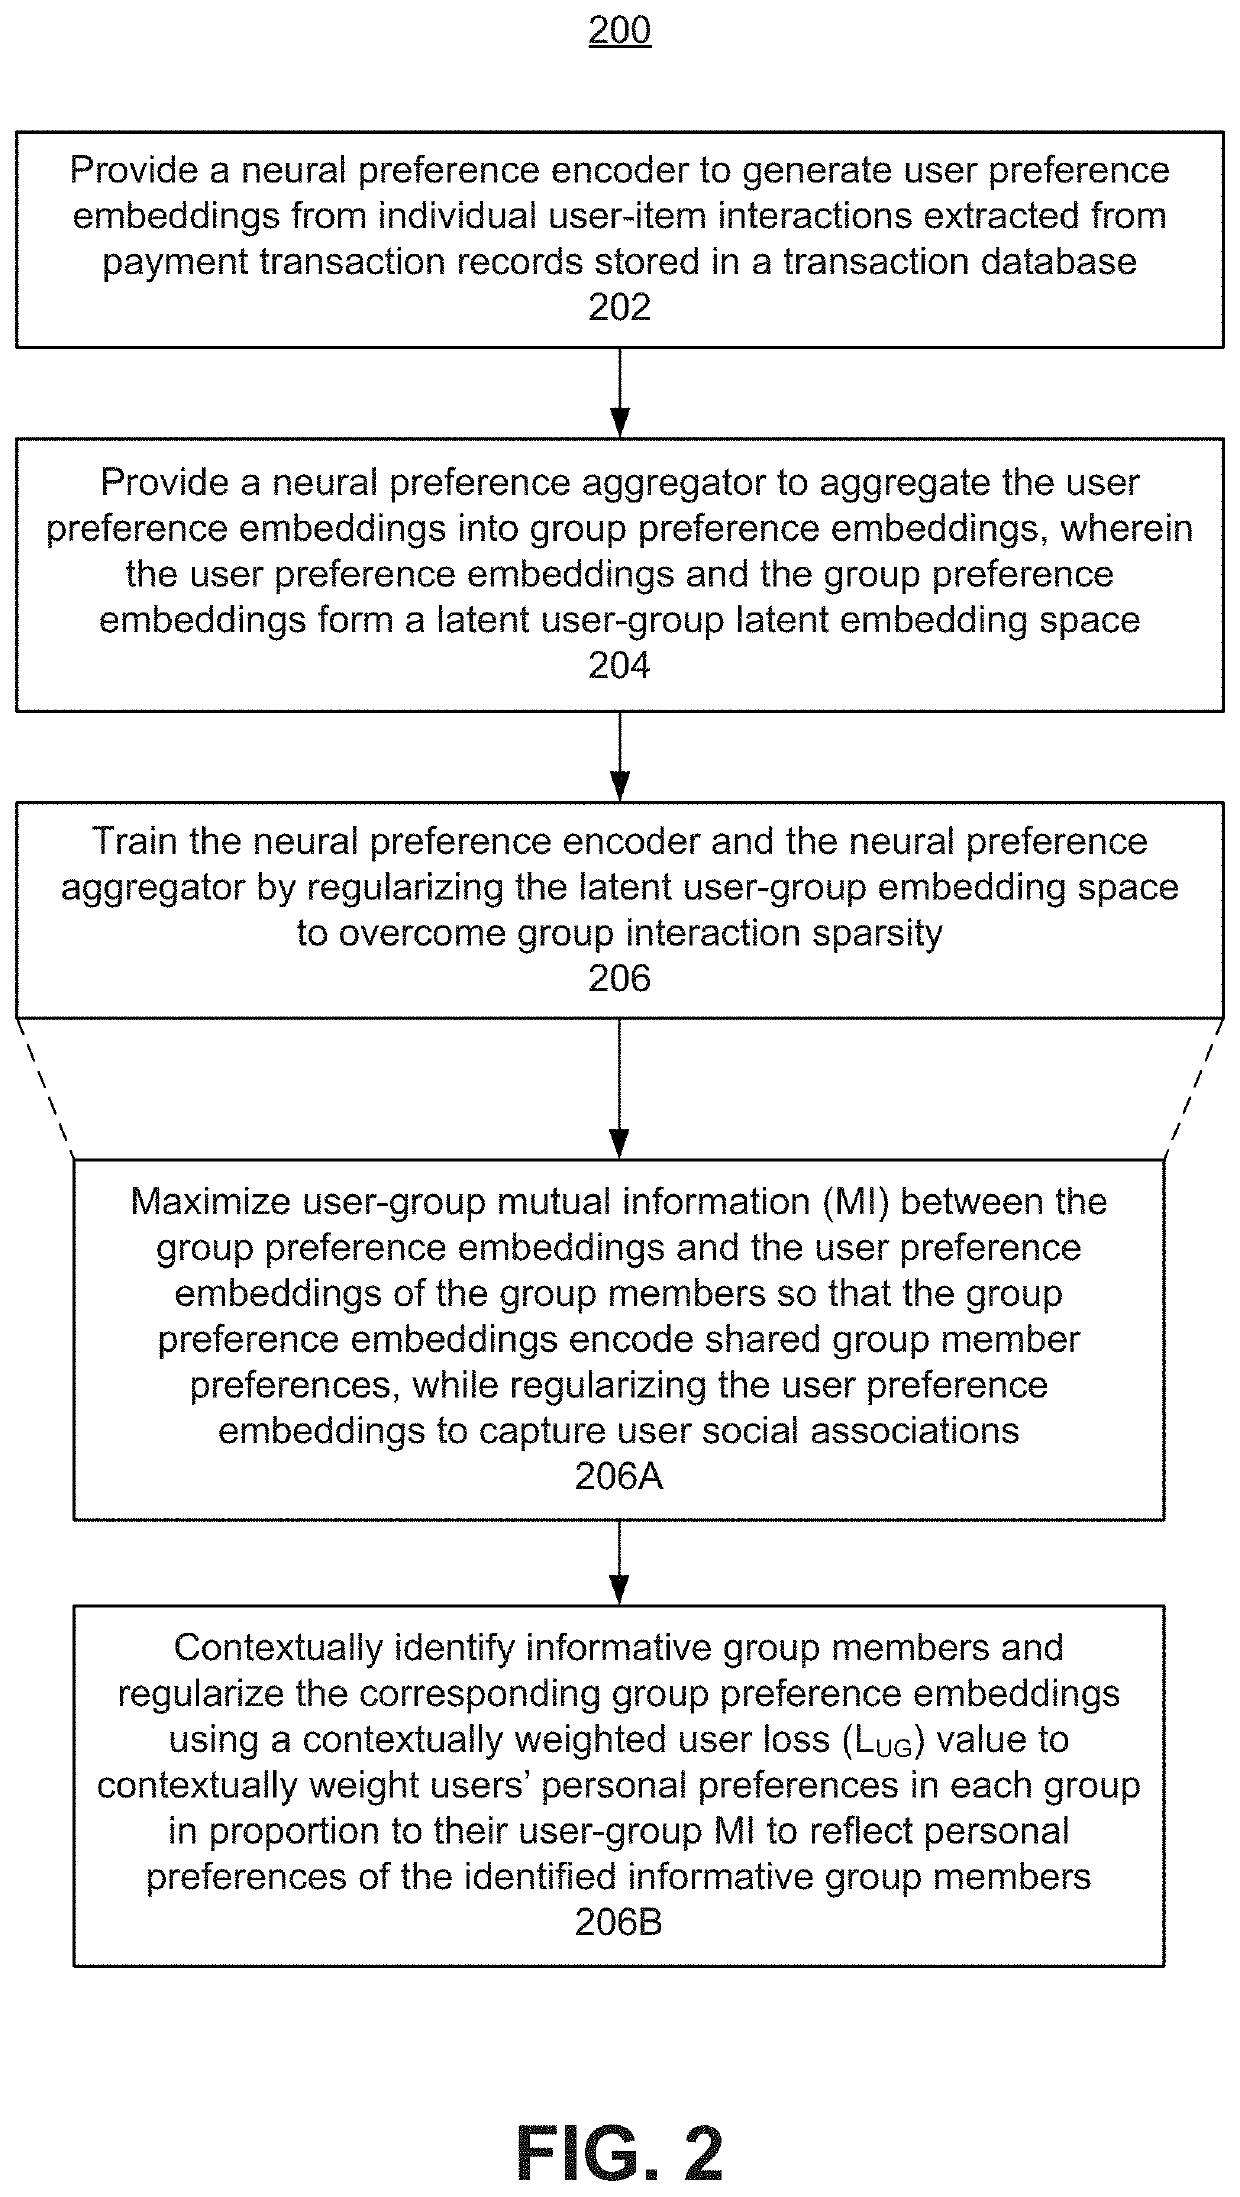 Group item recommendations for ephemeral groups based on mutual information maximization